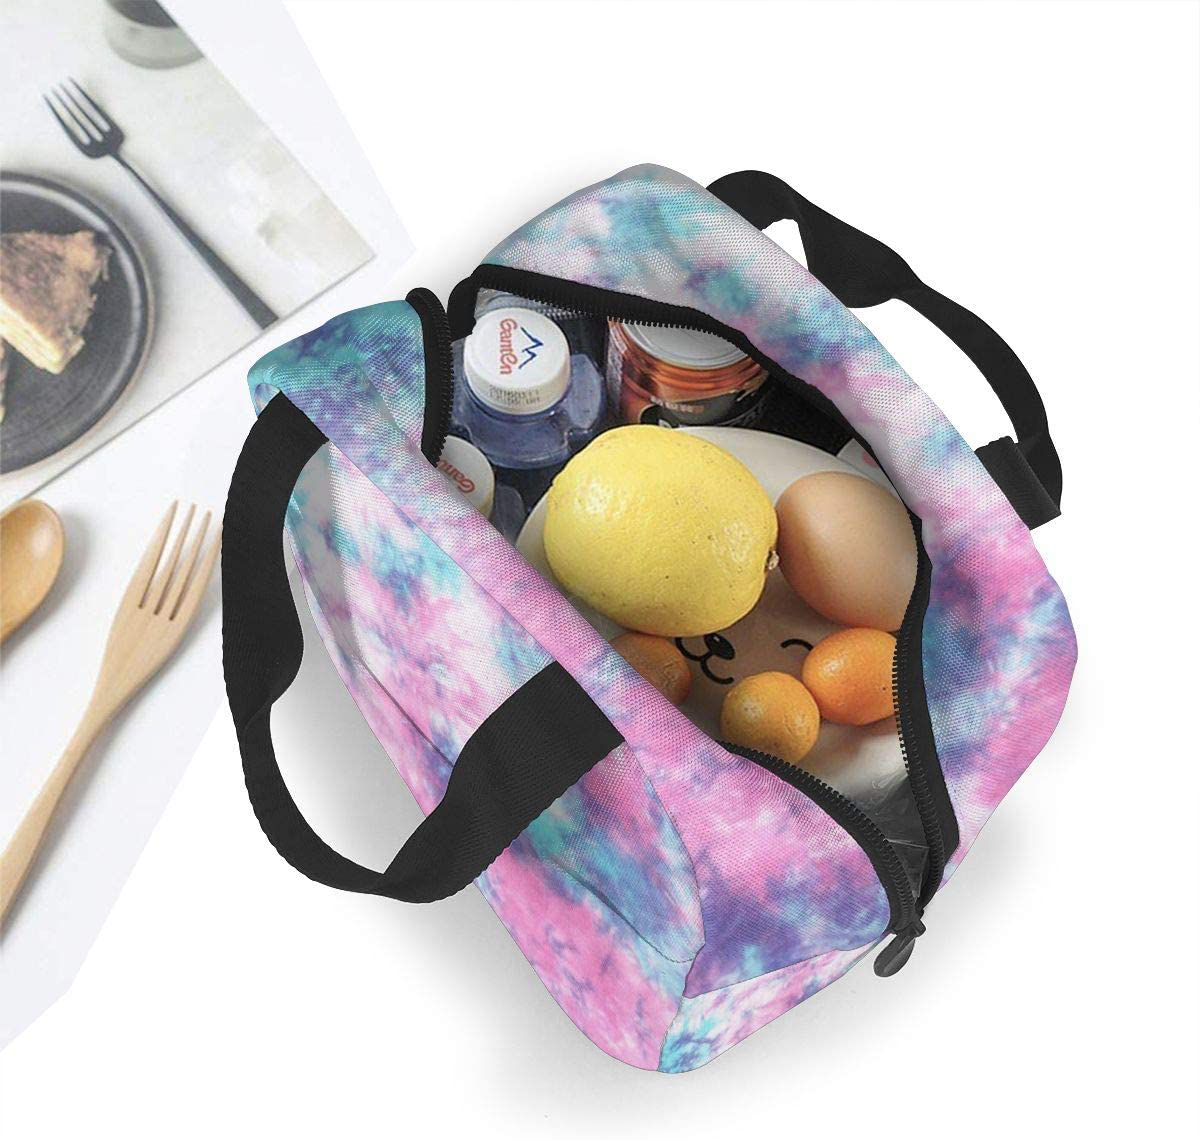 PrelerDIY Galaxies Lunch Box - Insulated Lunch Bags for Women/Men Reusable Lunch Tote Bags, Perfect for Office/Camping/Hiking/Picnic/Beach/Travel